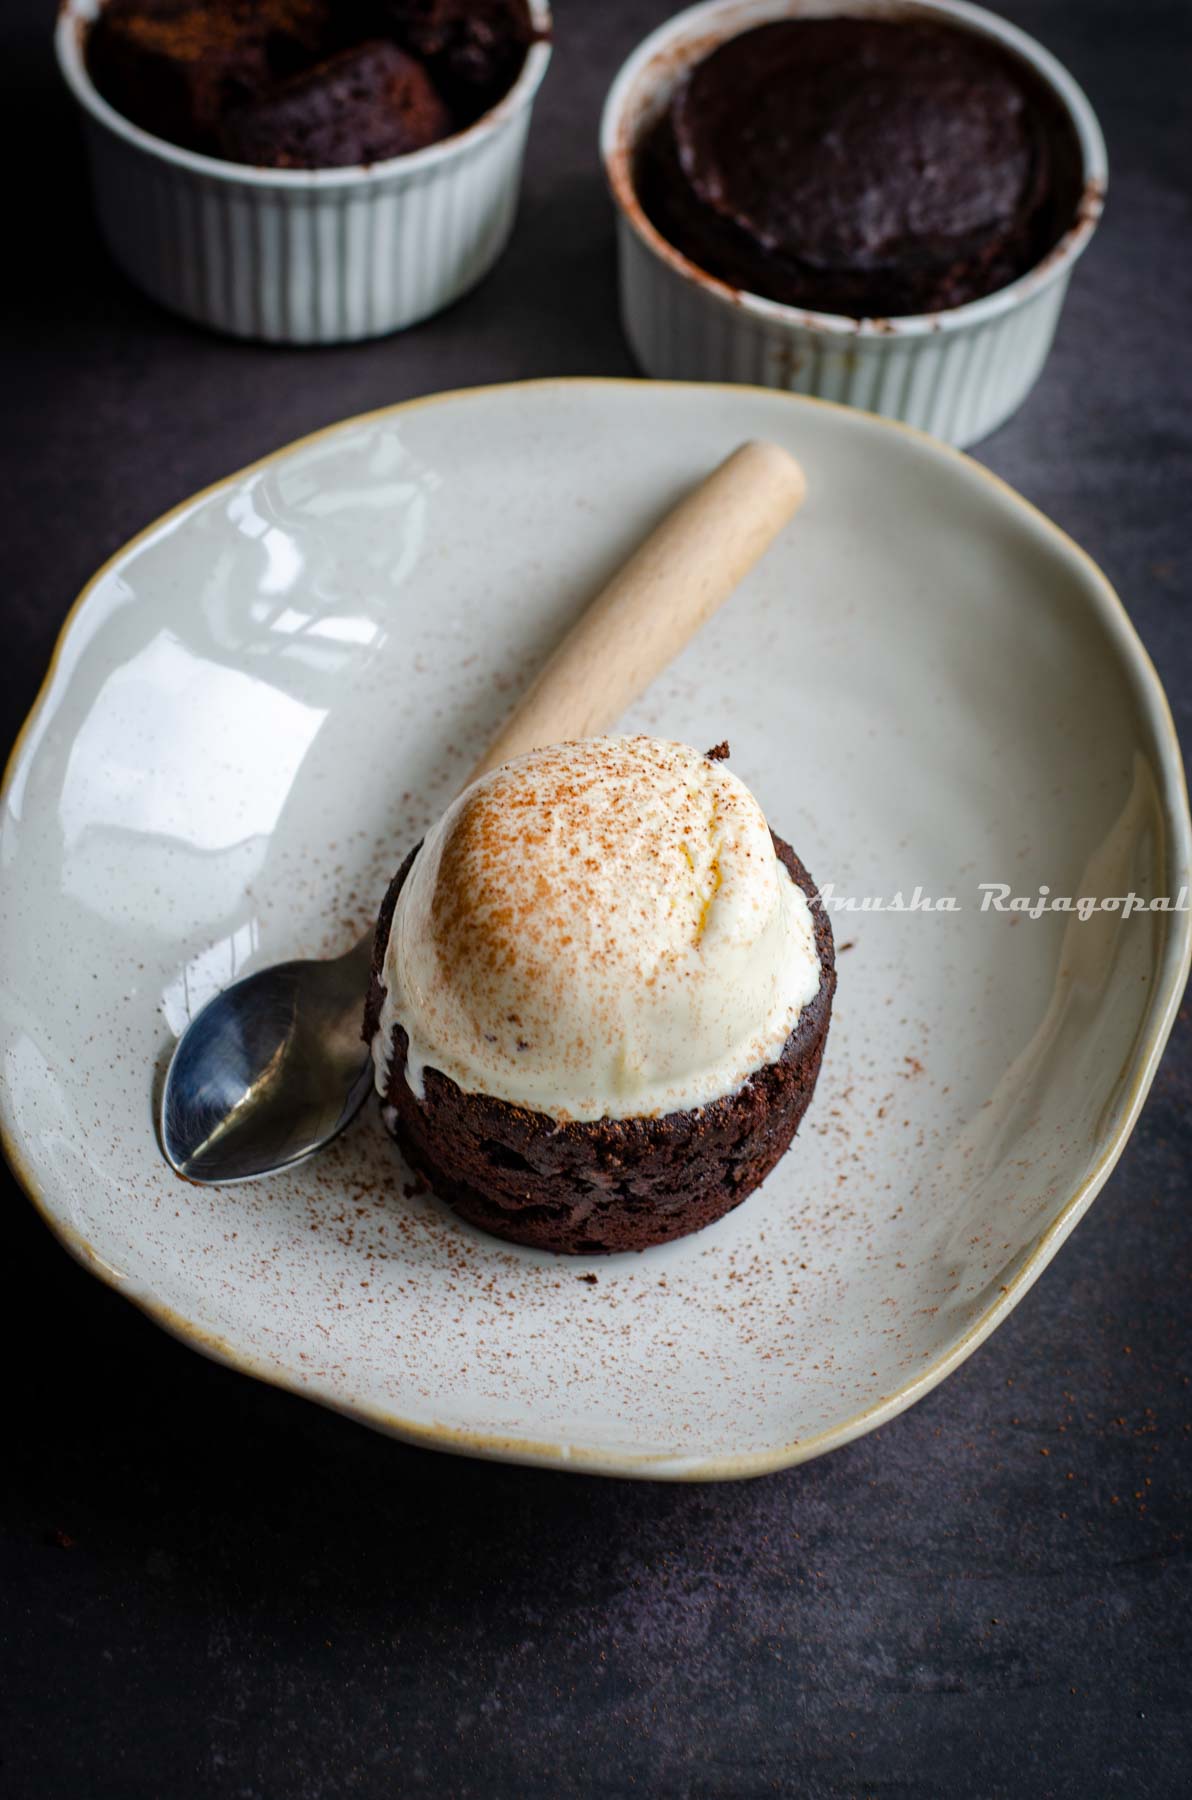 Choco lava cake with vanilla ice cream served on a plate with chocolate dusting